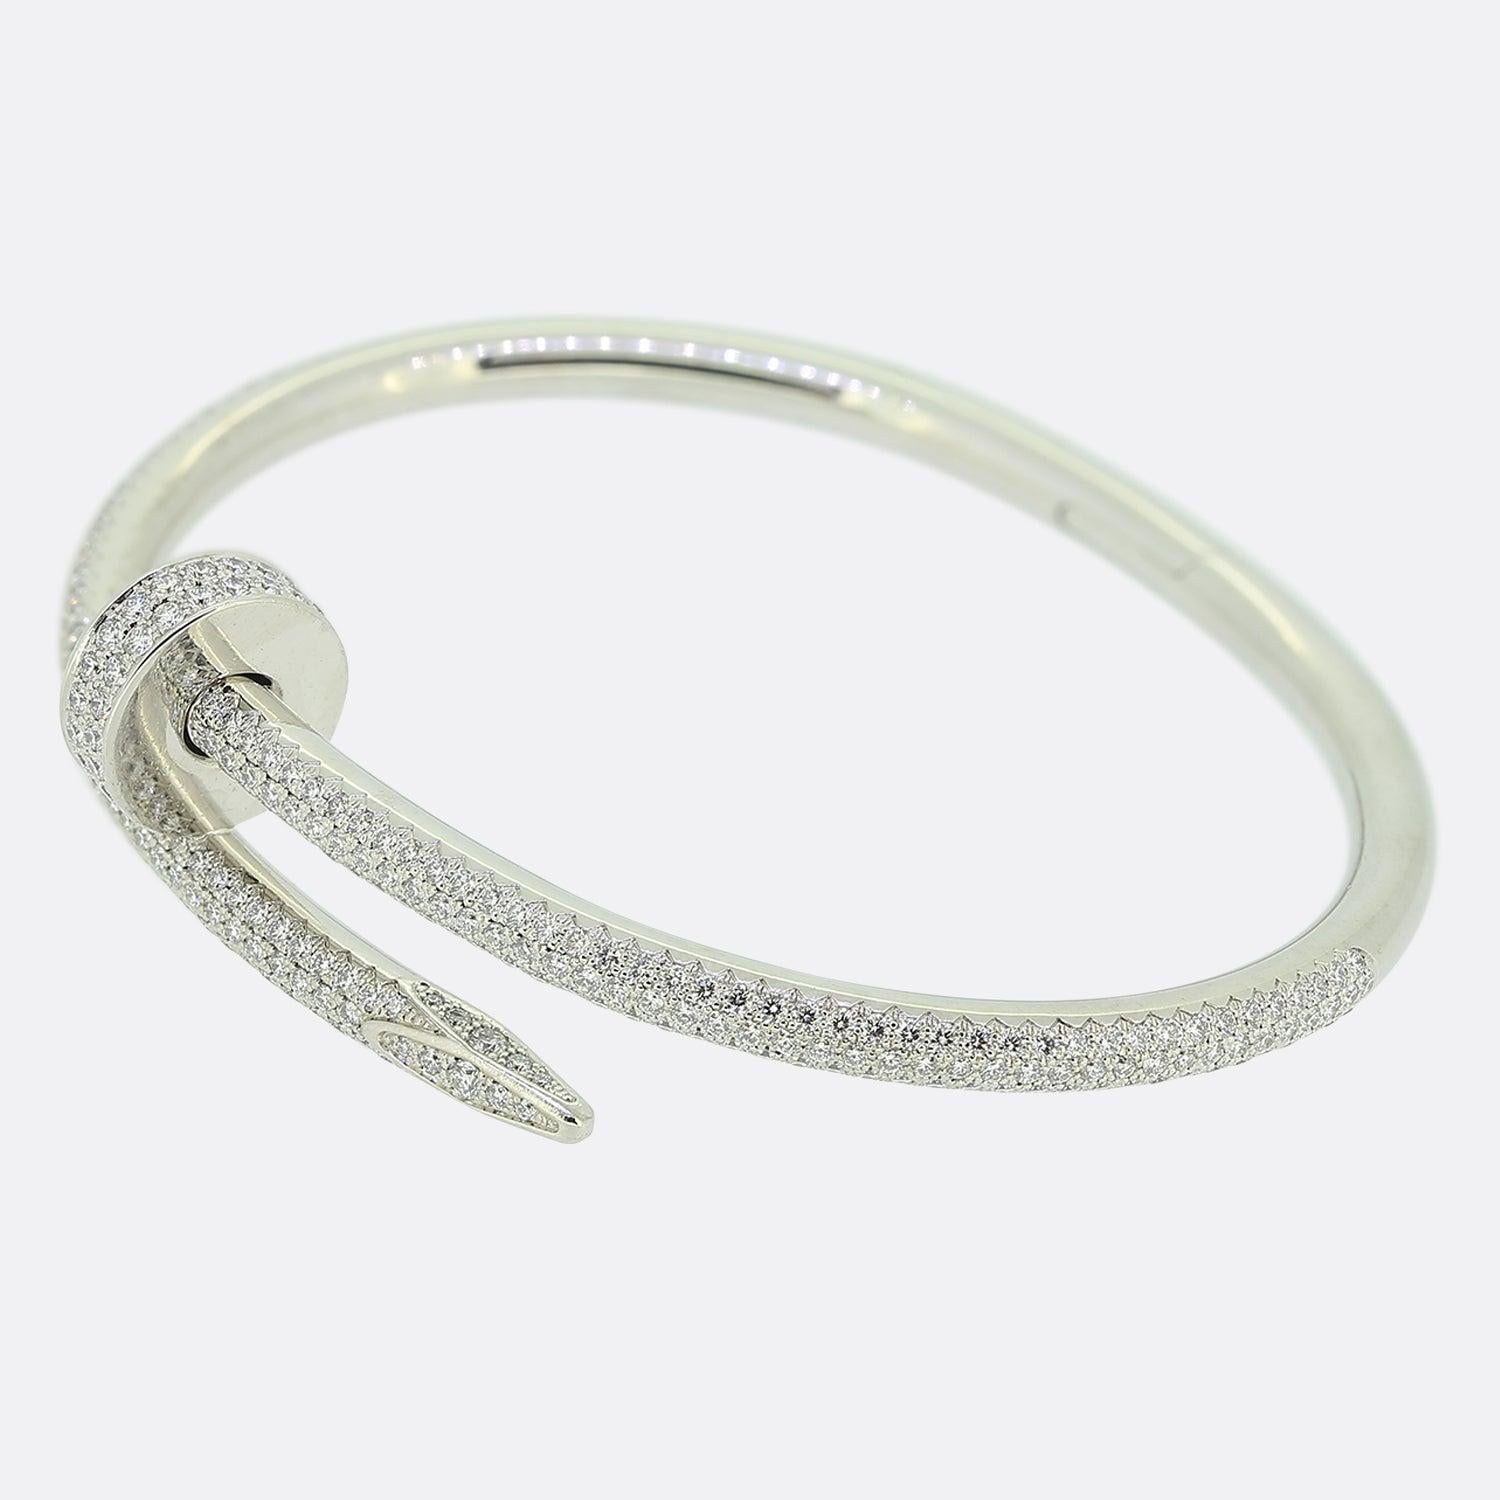 Here we have an 18ct white gold bracelet from the world renowned luxury jewellery house of Cartier. This piece forms part of their iconic Juste un Clou collection and showcases a wrap around nail design with the front of the piece being entirely